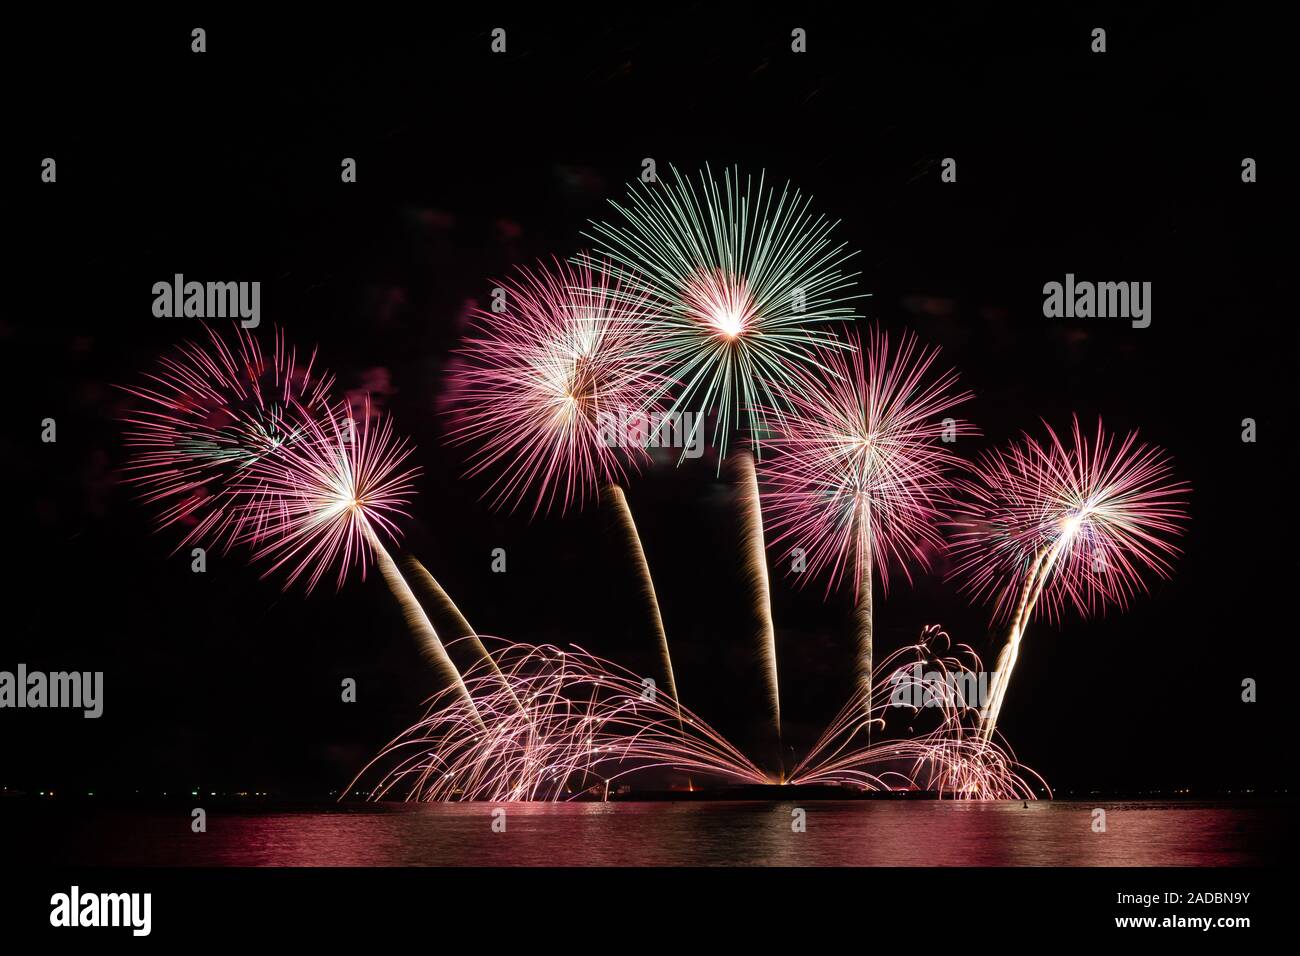 firework beautiful celebration festival colorful countdown merry christmas happy new year dark sky sparkle glowing cheerful anniversary Stock Photo